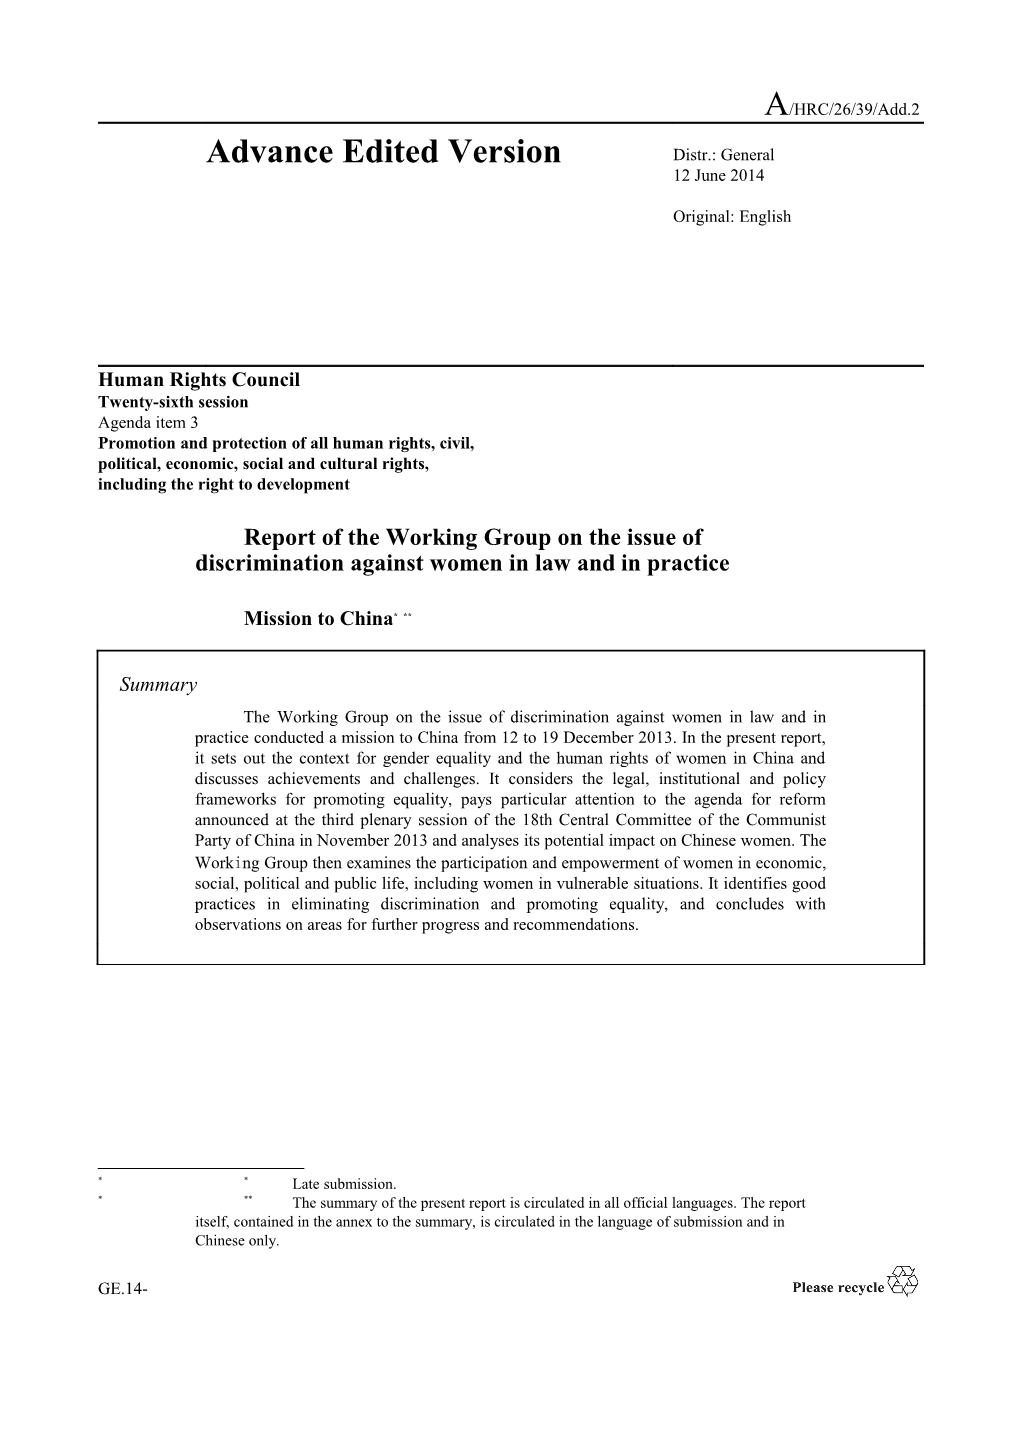 Report of the Working Group on the Issue of Discrimination Against Women in Law - Mission